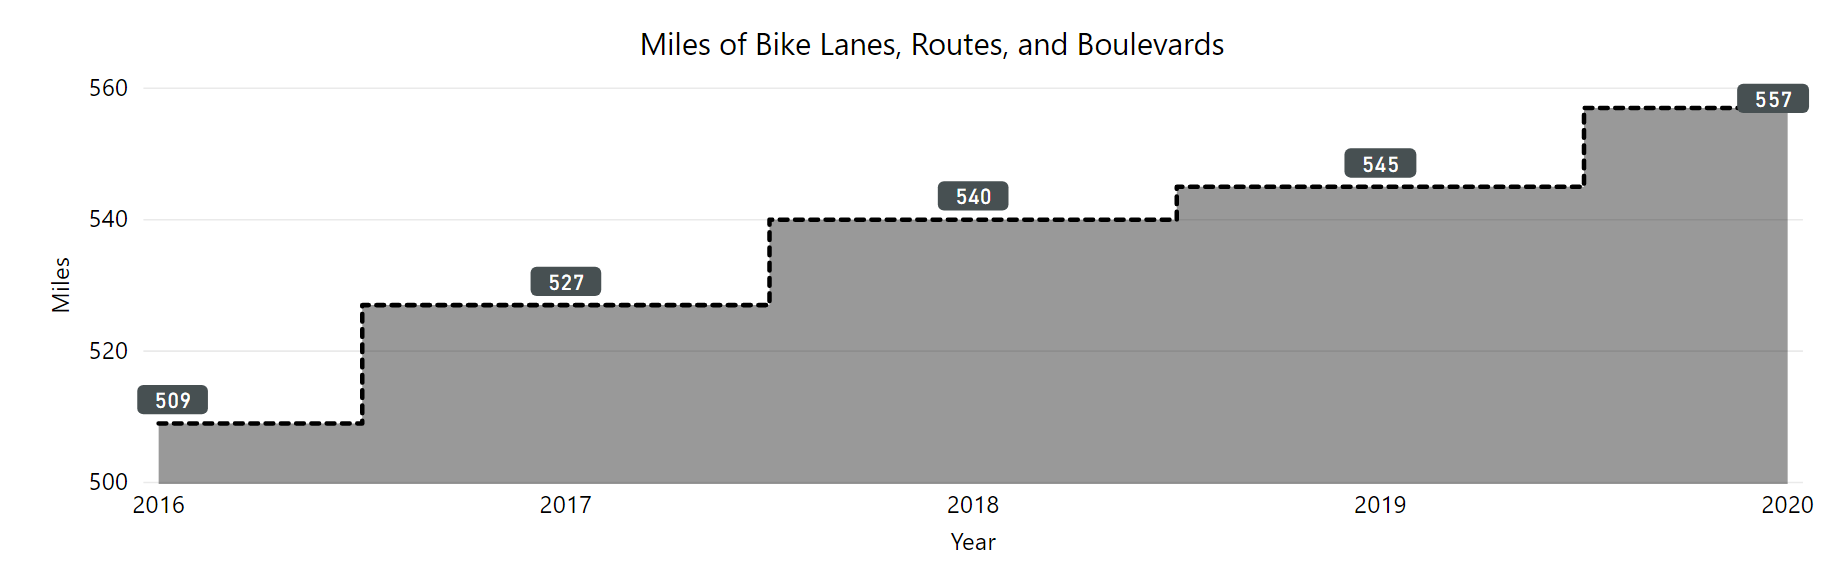 miles of bike lanes, routes, and boulevards from 2016 to 2020. Graph shows a steady increase from 2016 to 2020.